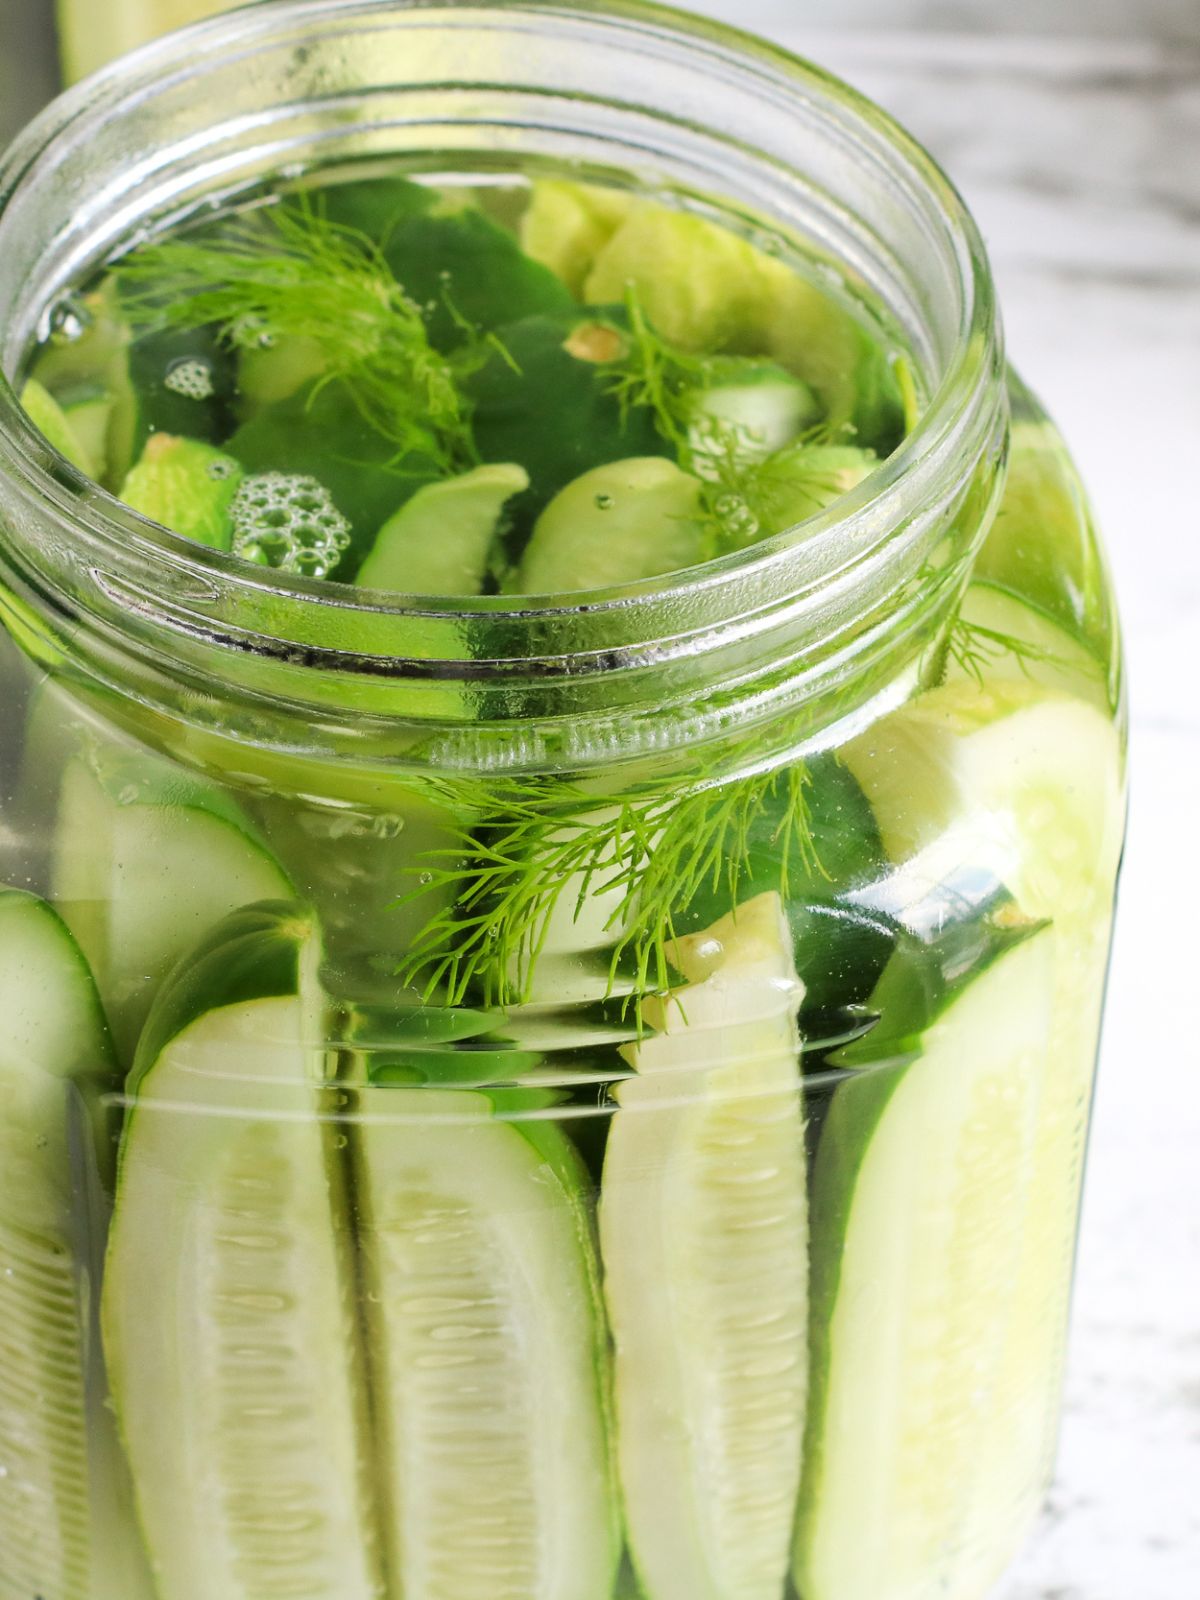 Cucumbers in mason jar with pickling spices and fresh dill.